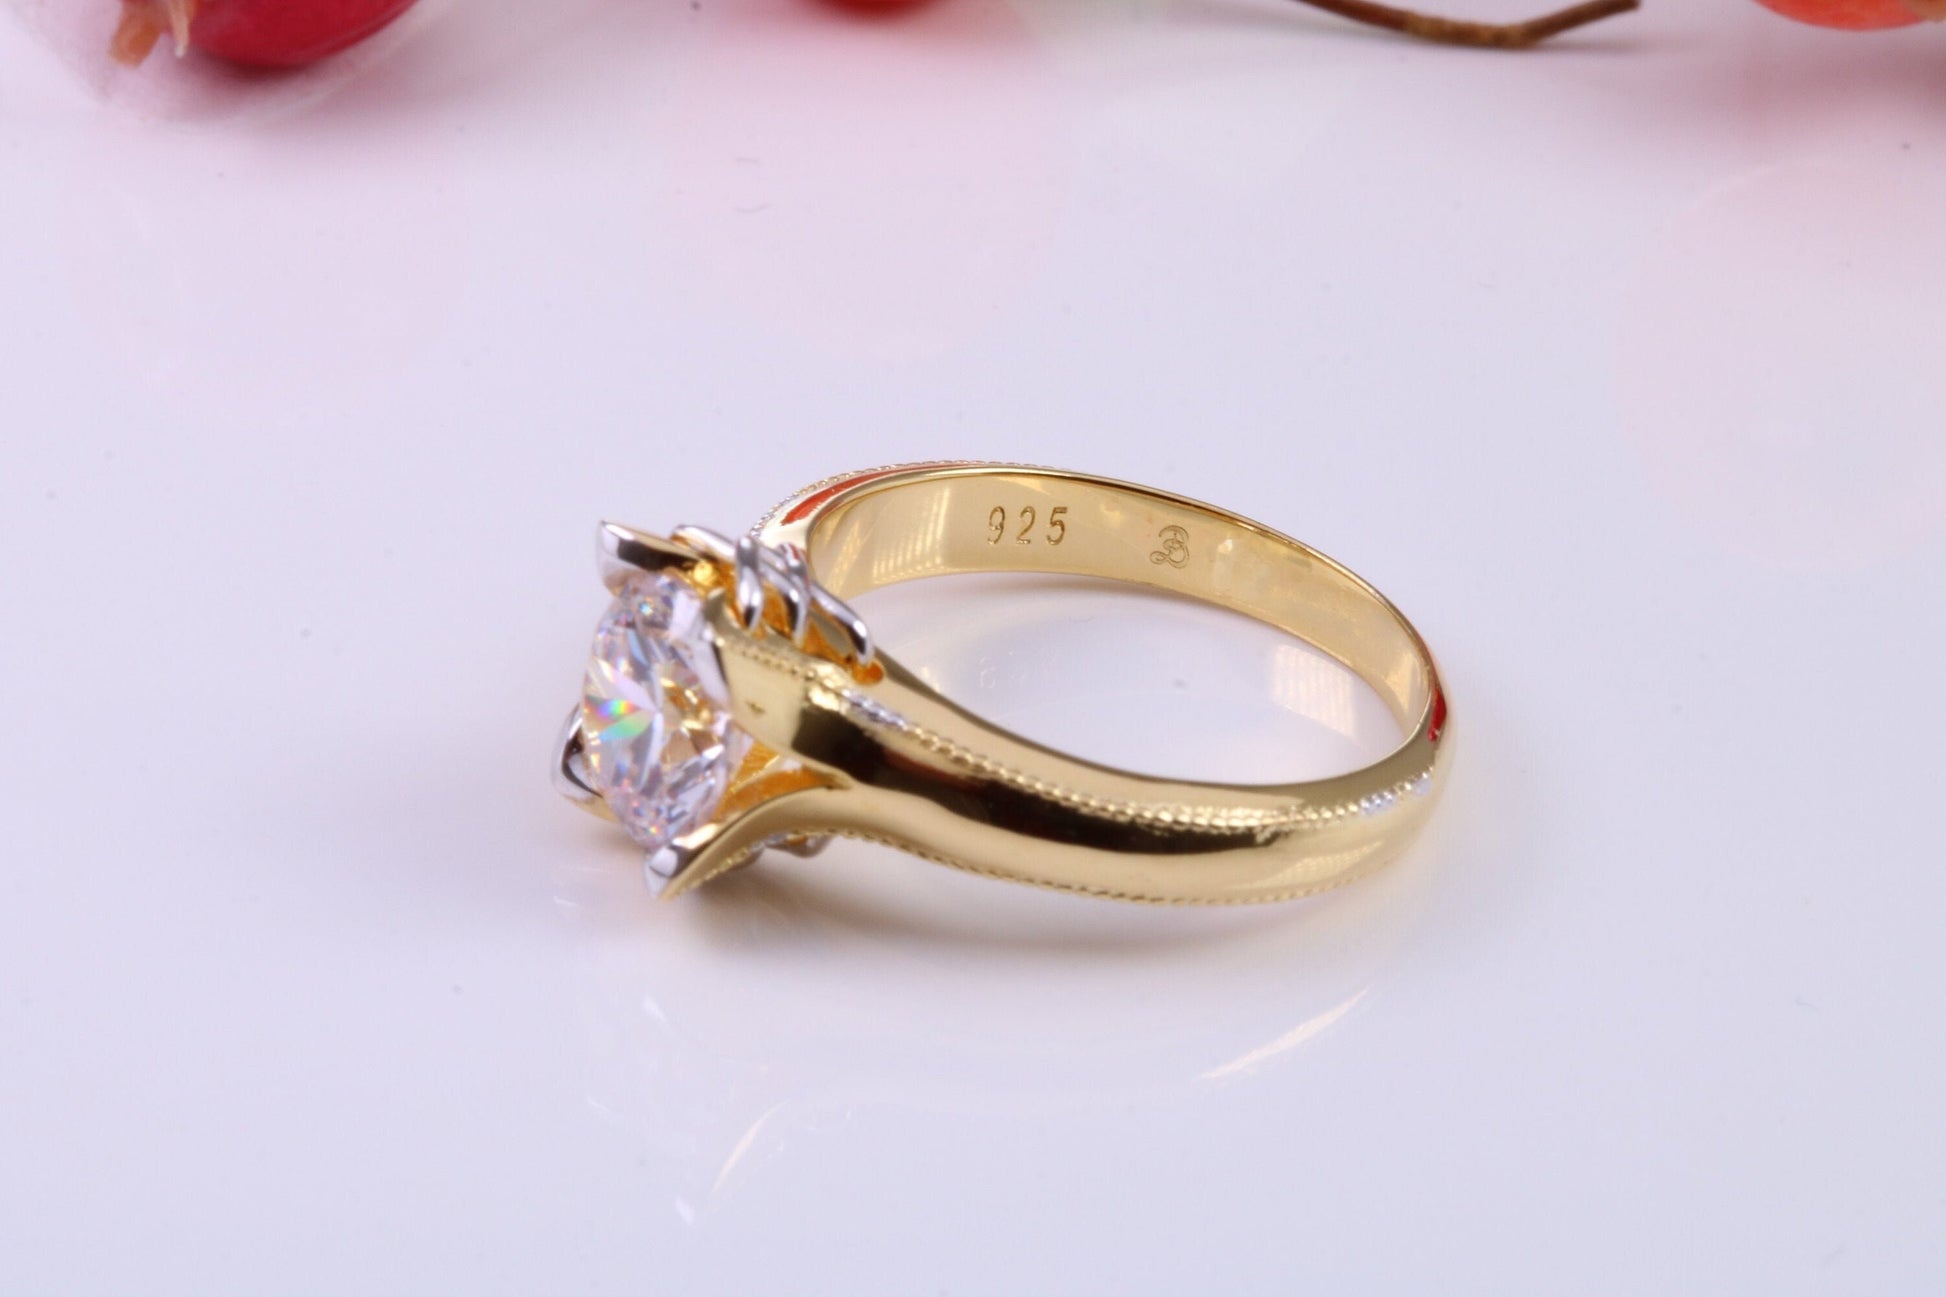 Very Dressy and Chunky Cubic Zirconia set Ring, Made from solid Silver, 18ct Yellow Gold Plated